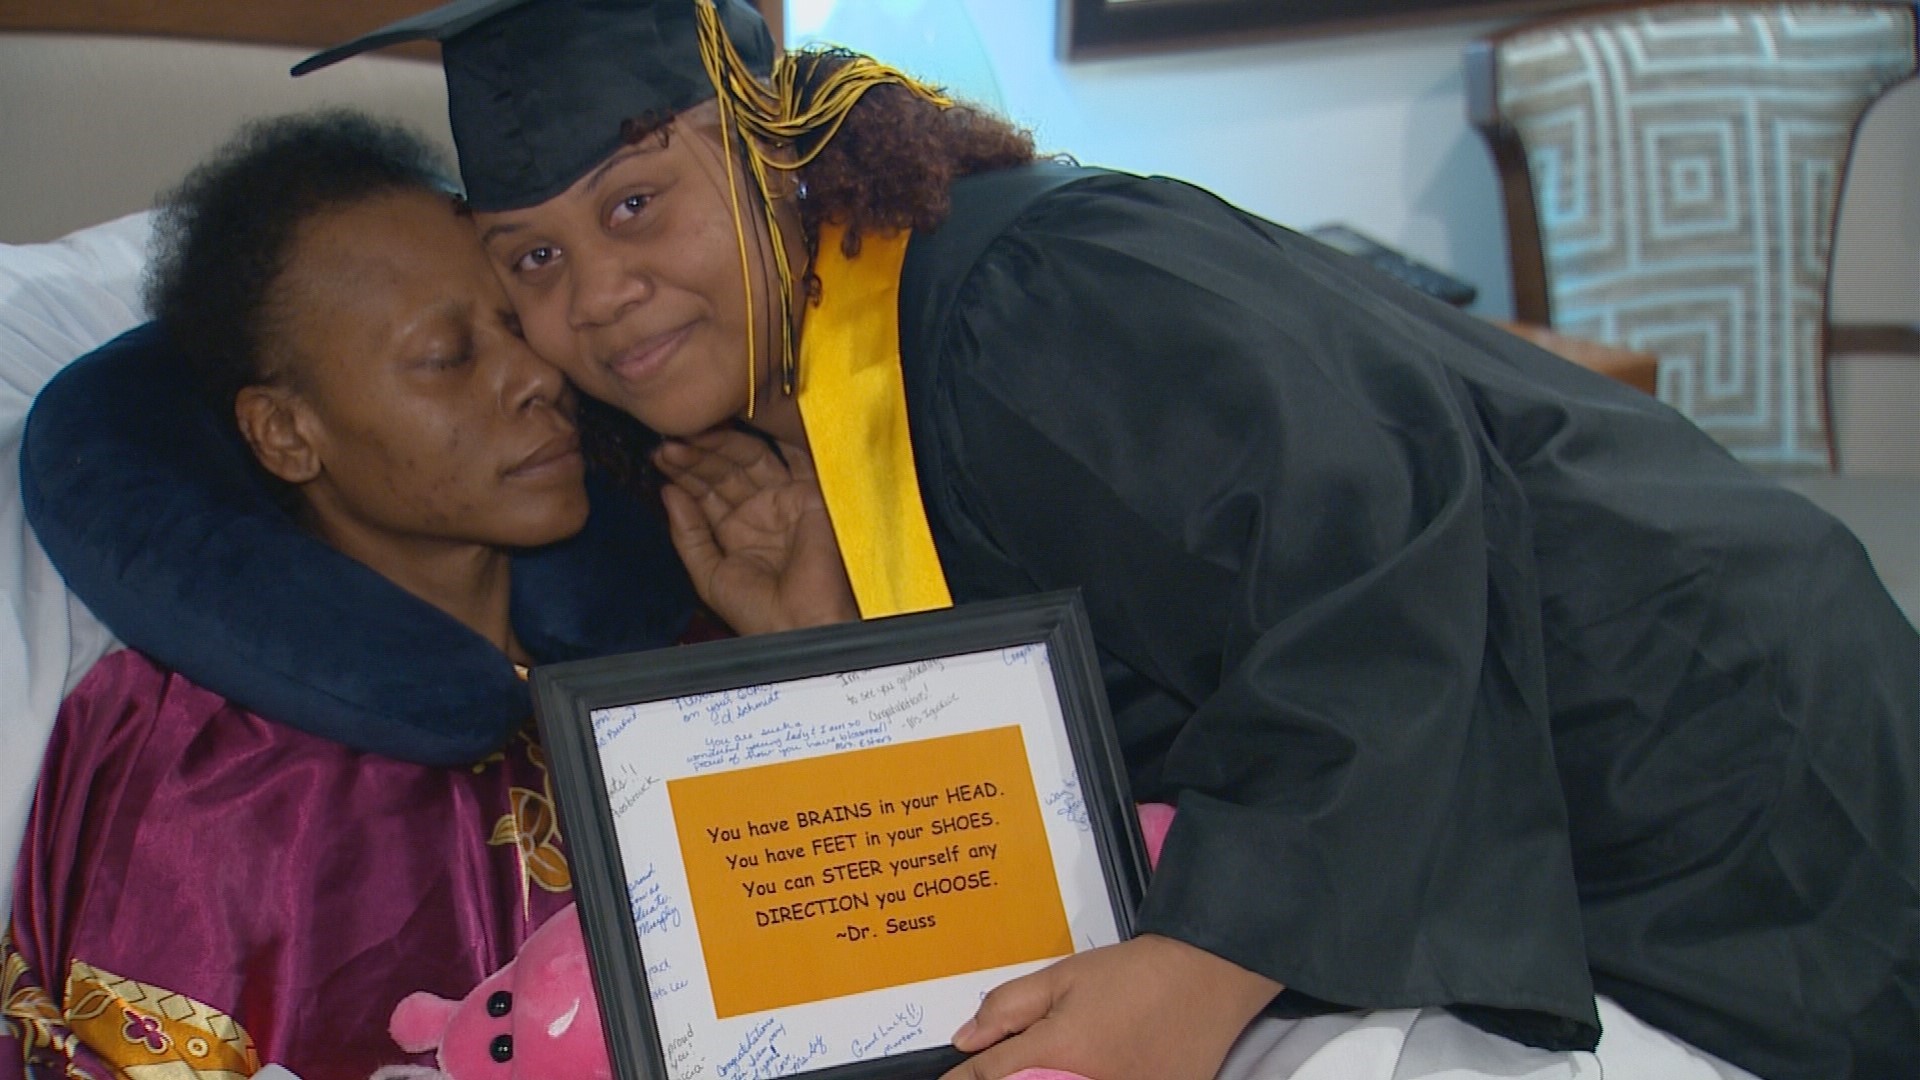 A touching moment took over the halls of the T. Boone Pickens Hospice Care Center in Dallas Monday night after a daughter graduated from high school near her mother.